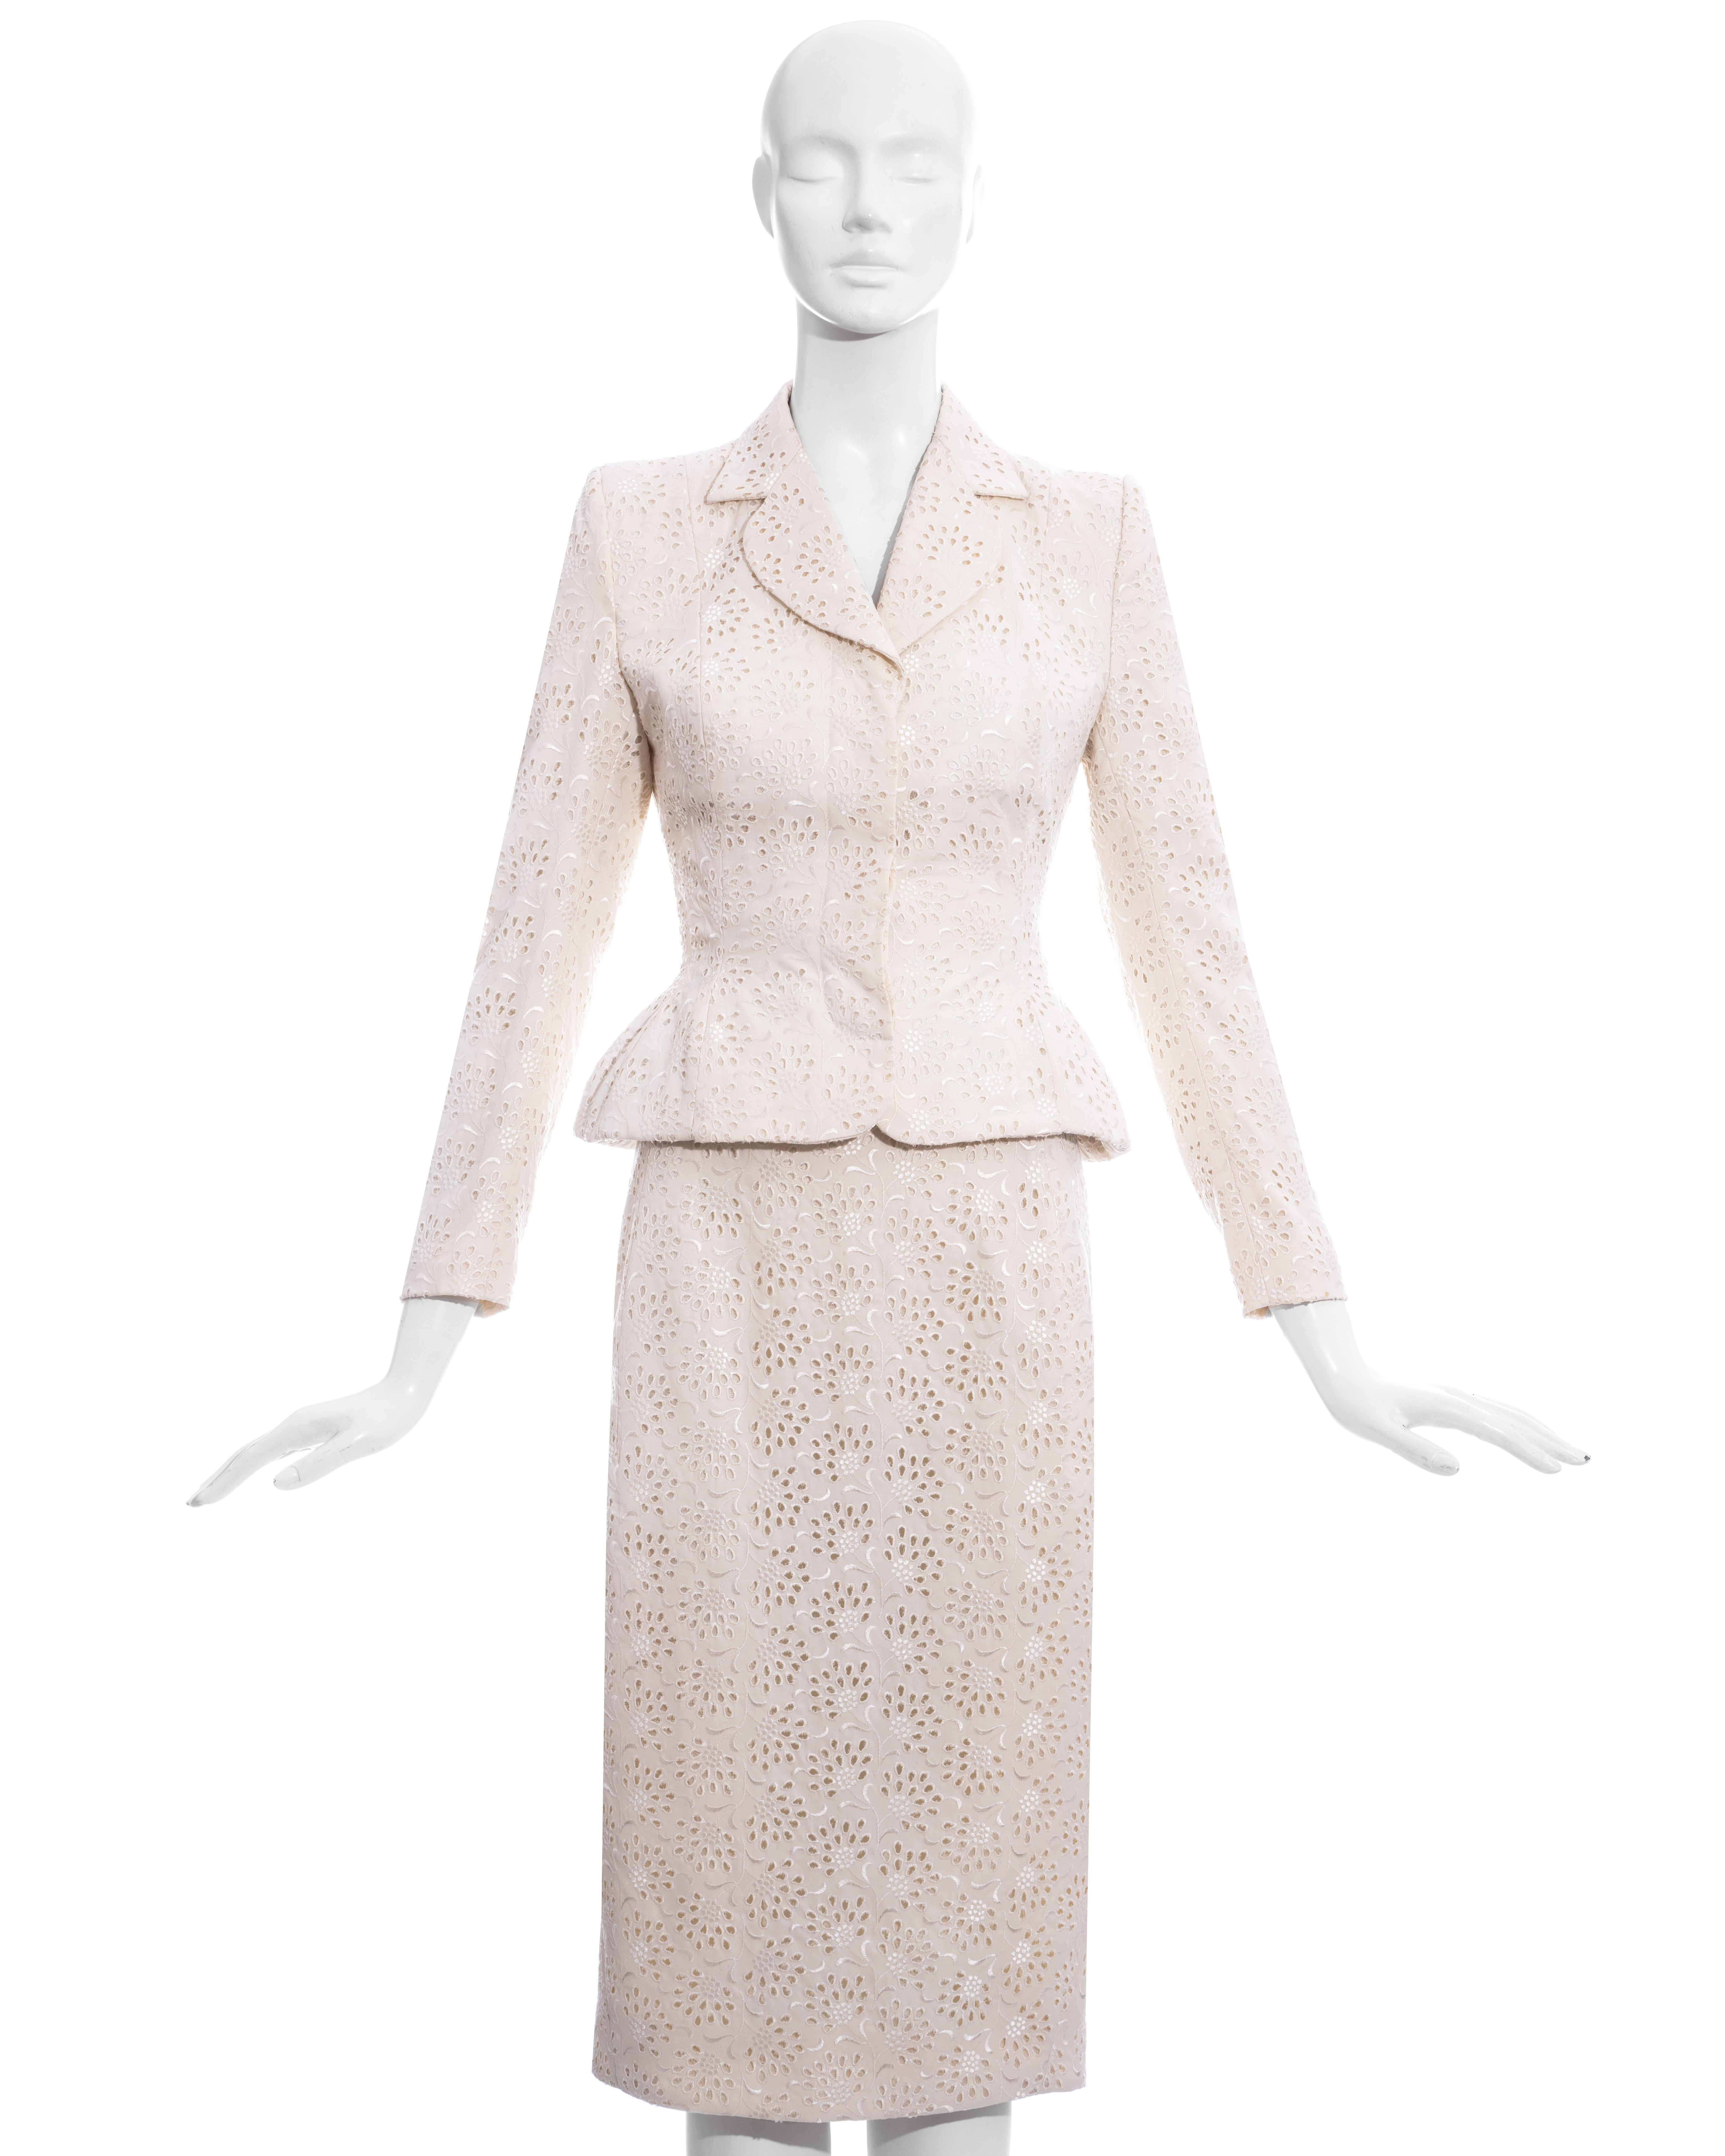 John Galliano white broderie anglaise cotton skirt suit comprising: fitted blazer jacket with hidden front button fastenings, notched lapel and accentuated waist and hips. Matching mid-length pencil skirt with back vent and zip fastening.